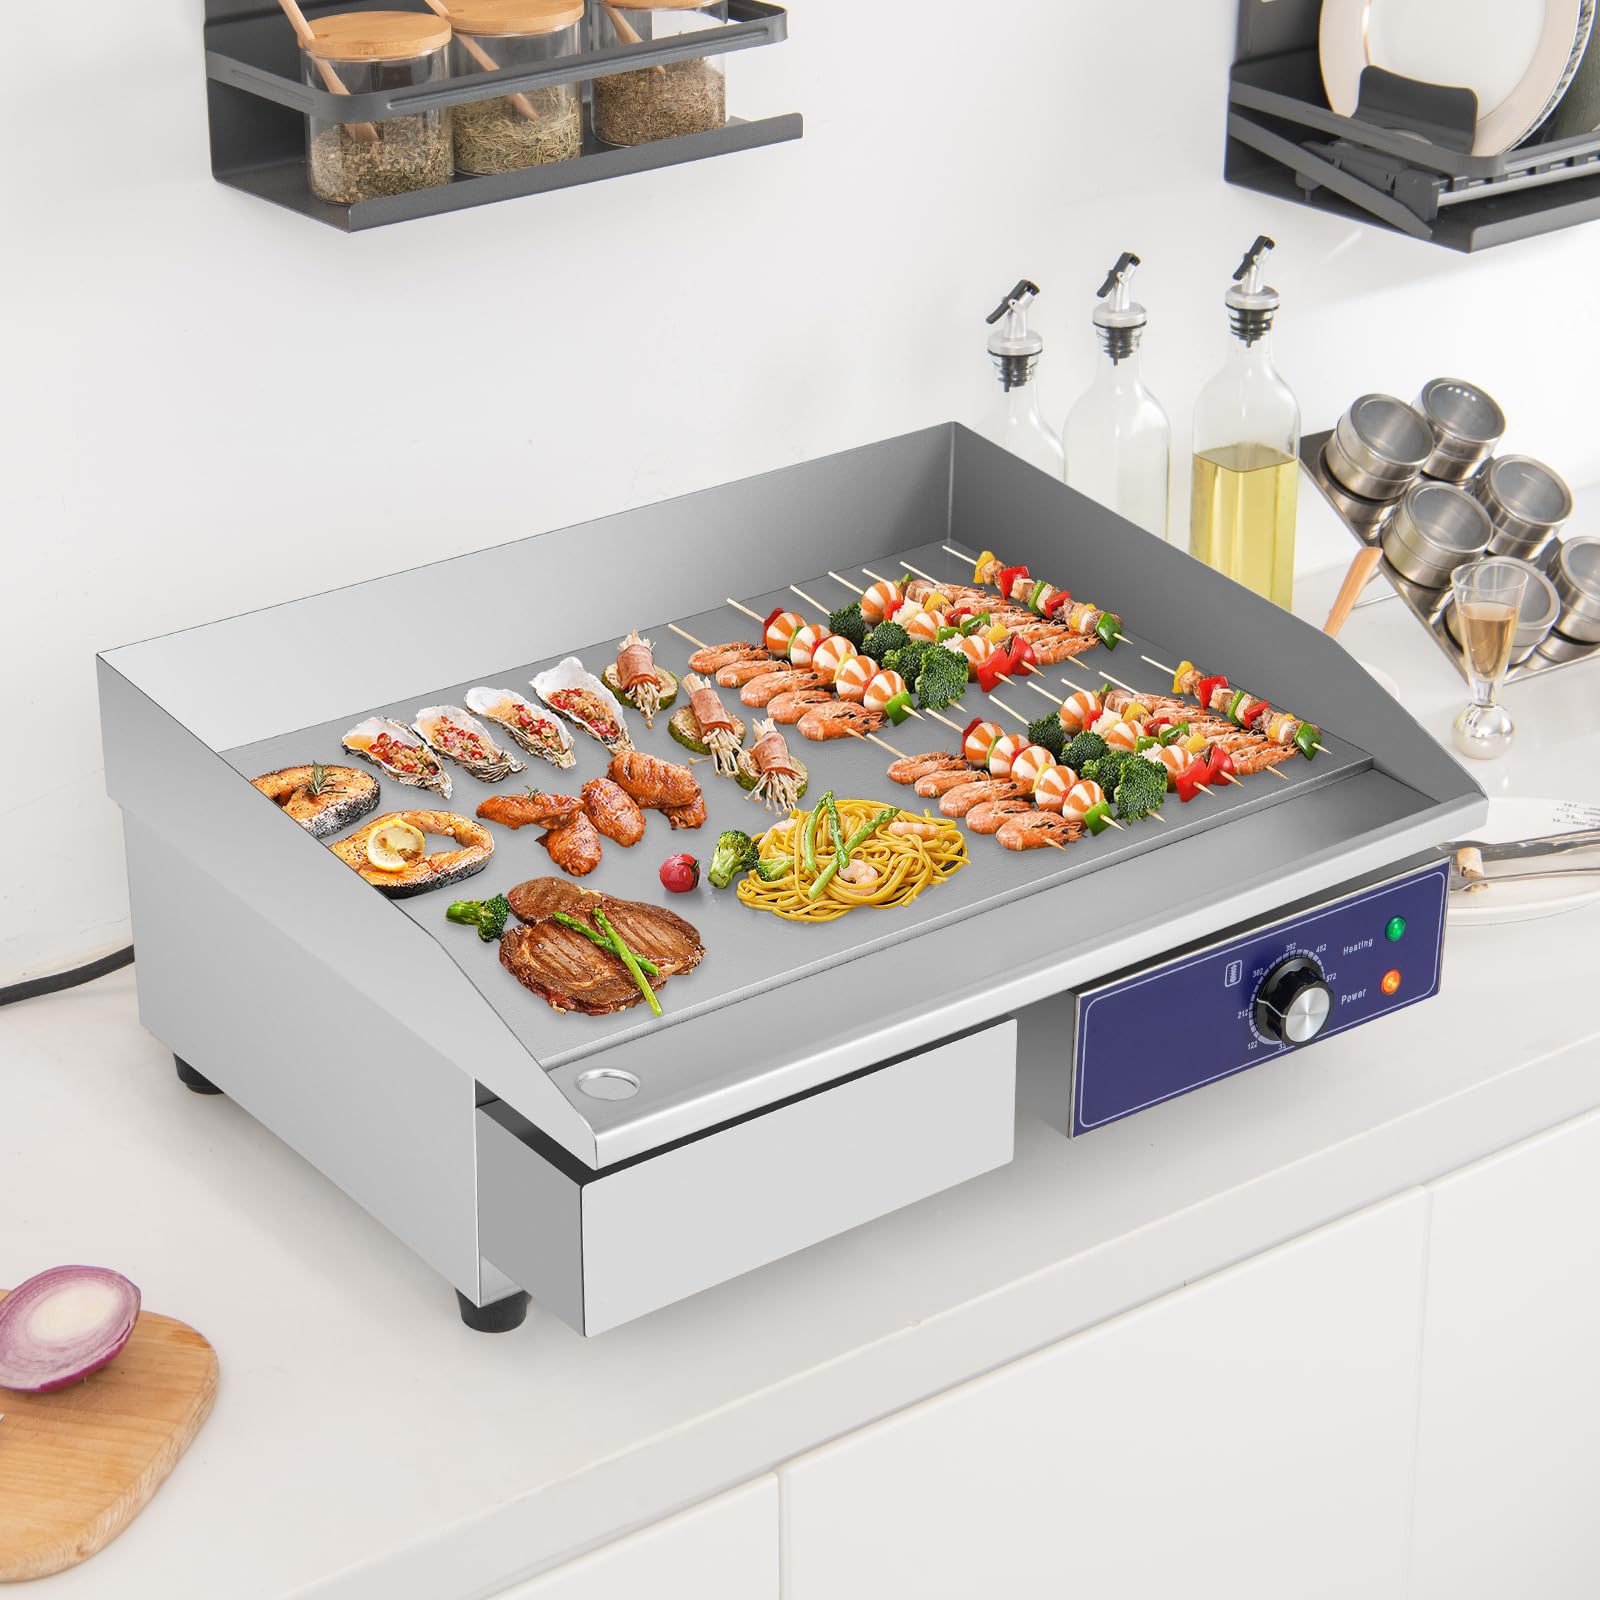 22" Electric Griddle 2000W - Giantex 